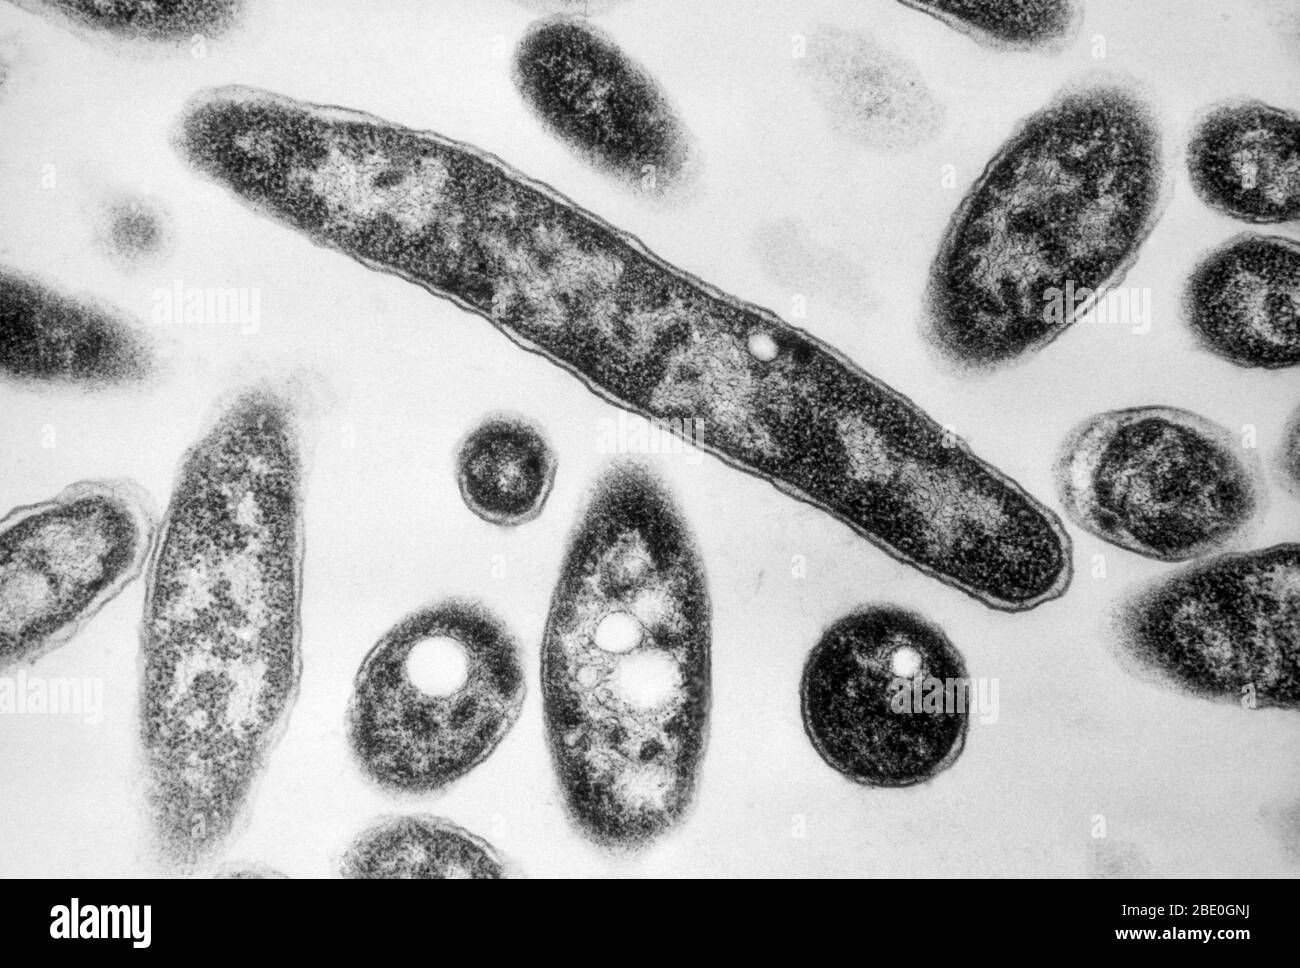 Transmission Electron Micrograph (TEM) showing bacteria in the genus Legionella, with visible vacuoles. These pathogenic, Gram-negative bacteria cause legionellosis or Legionnaires' disesase. Bacteria on bacteriologic medium. Magnification: 90,000x at 35mm. Stock Photo